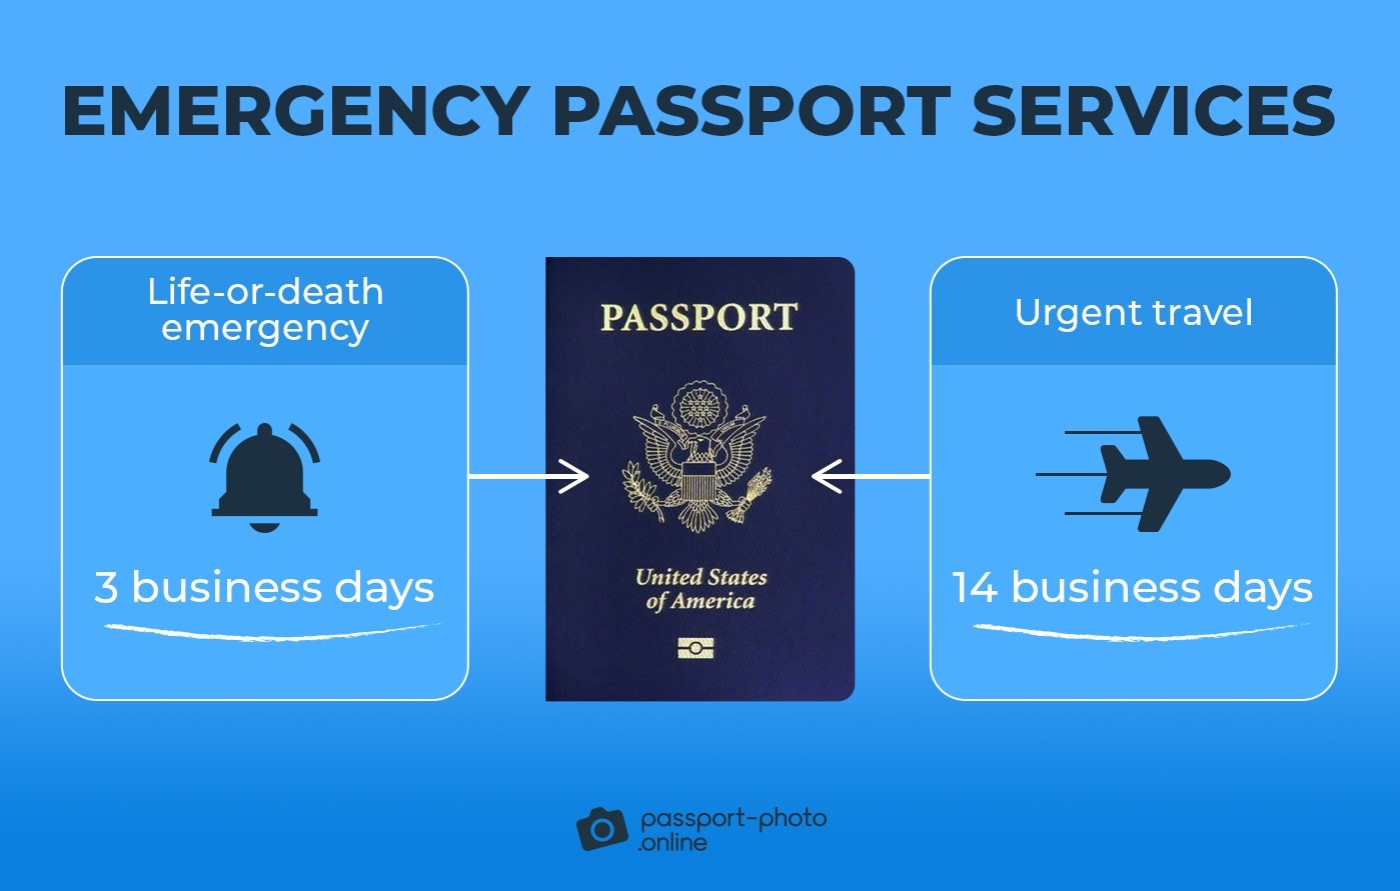 Estimated processing time of life-or-death emergency and urgent US passports